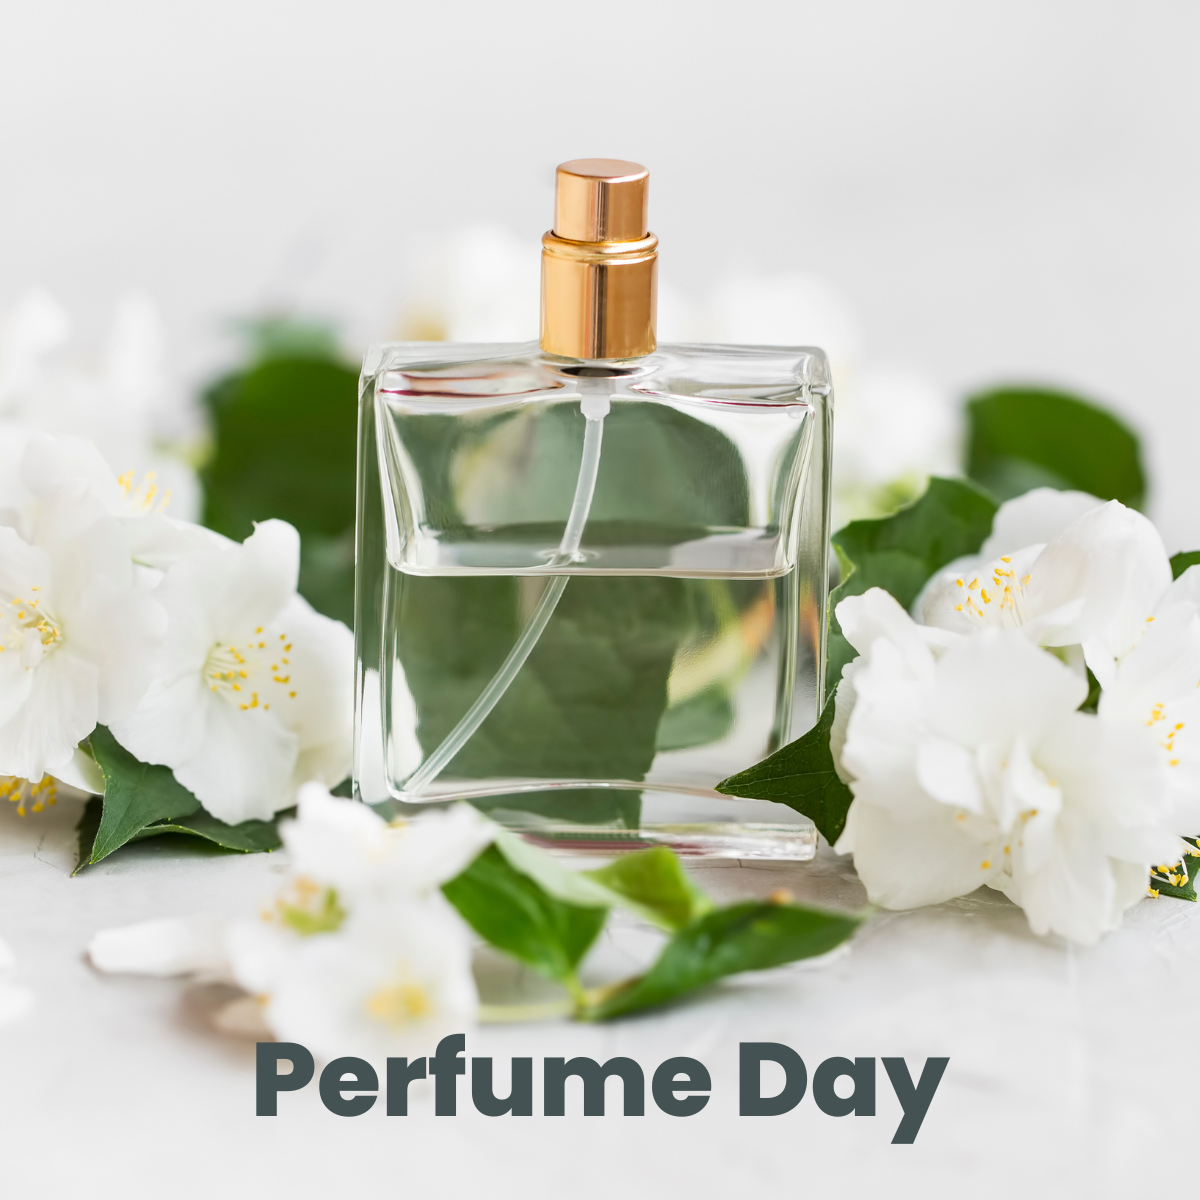 Perfume Day 2023 Images, Greetings, Wishes, Quotes, Messages, Shayari, Sayings and WhatsApp Status